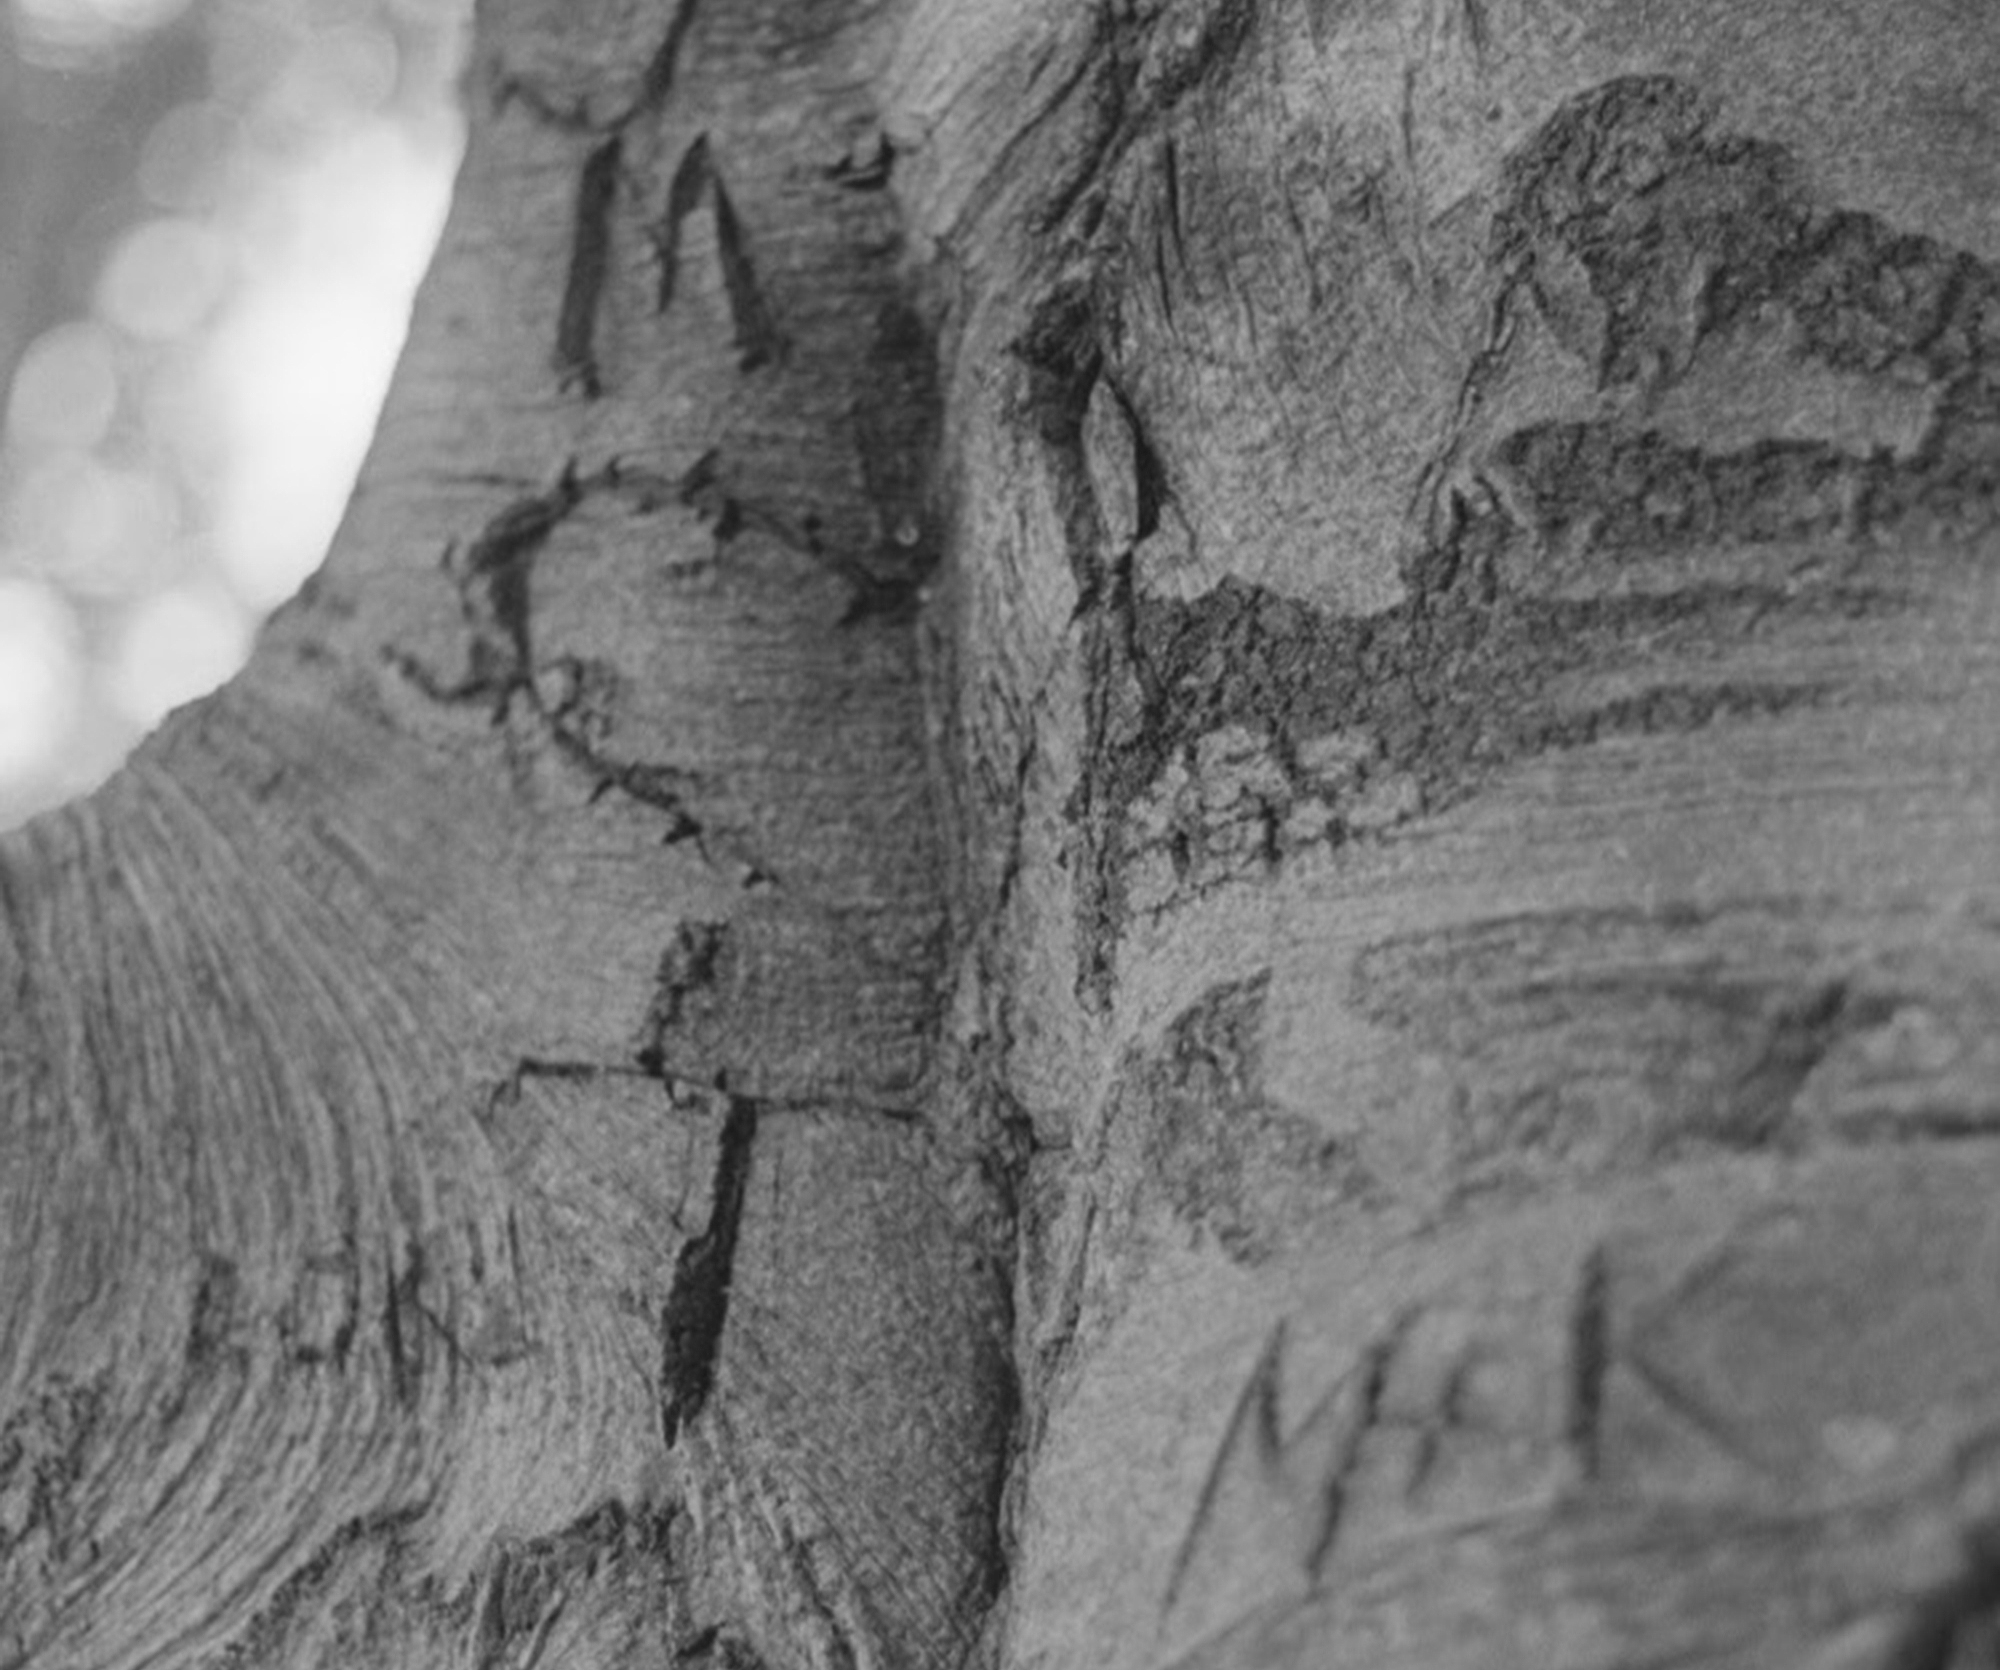 the scarred, carved trunk of an old beech tree